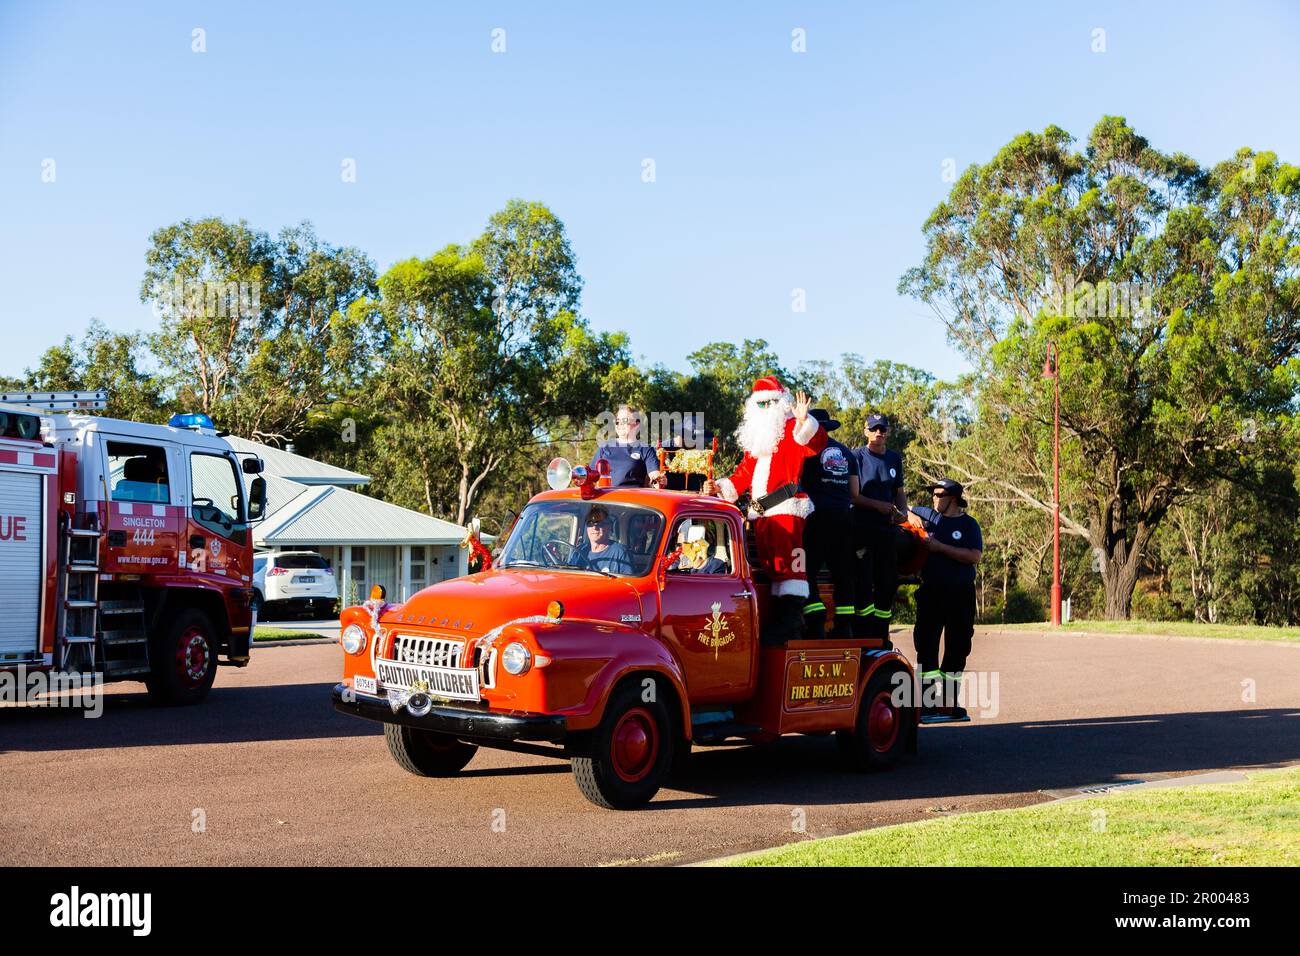 Christmas time lolly run fire truck escorting Santa Claus around the town of Singleton to give out lollies Stock Photo